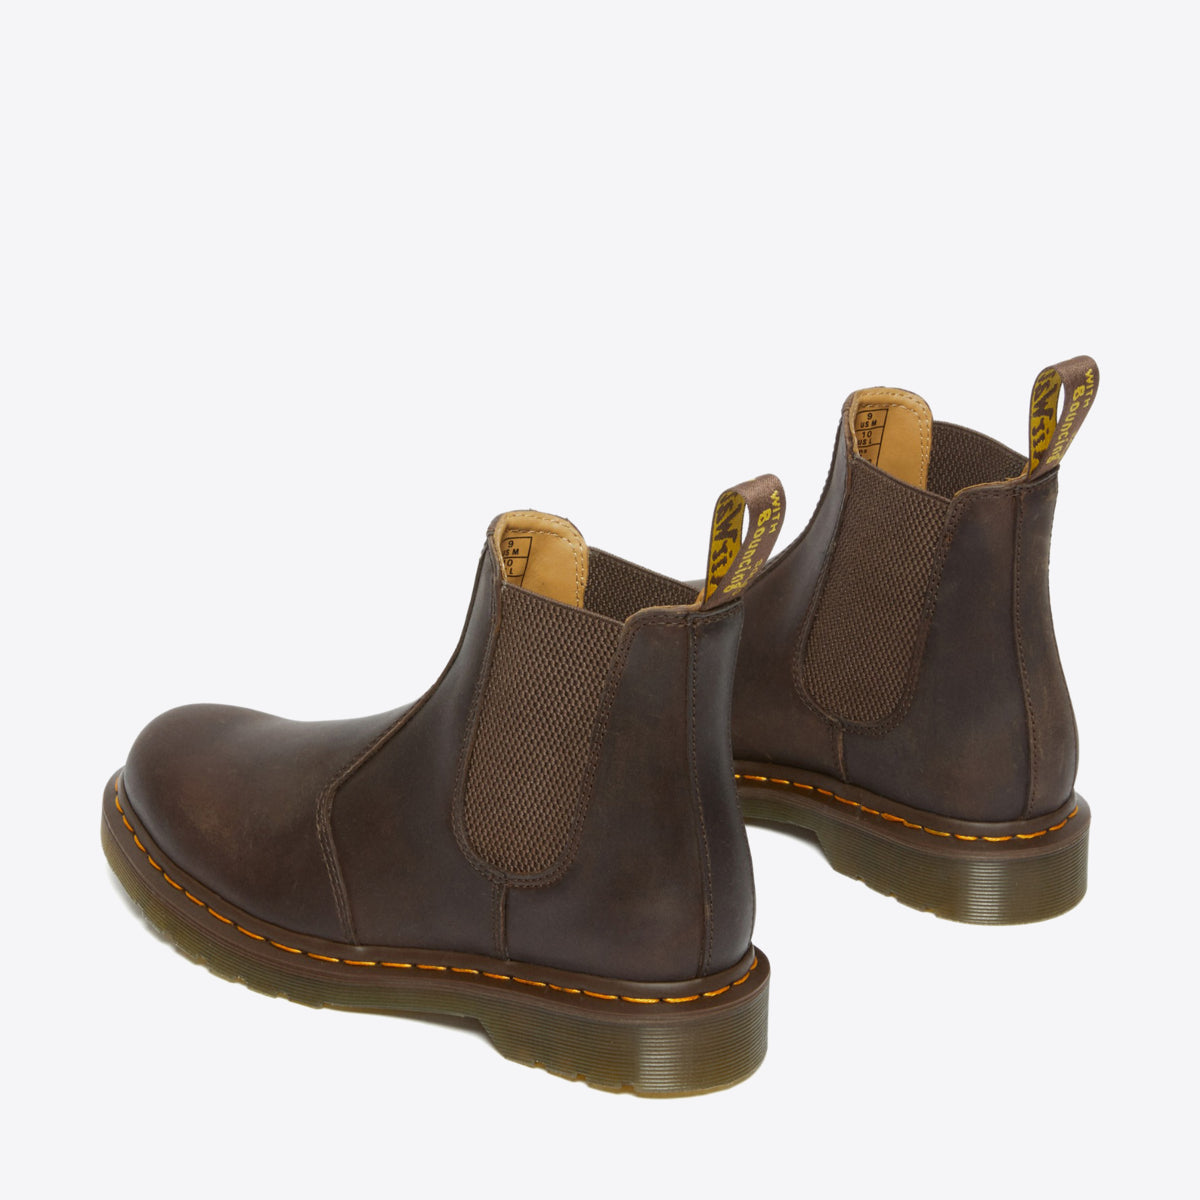 DR MARTENS 2976 Yellow Stitch Crazy Horse Chelsea Boot Dark Brown - Image 10